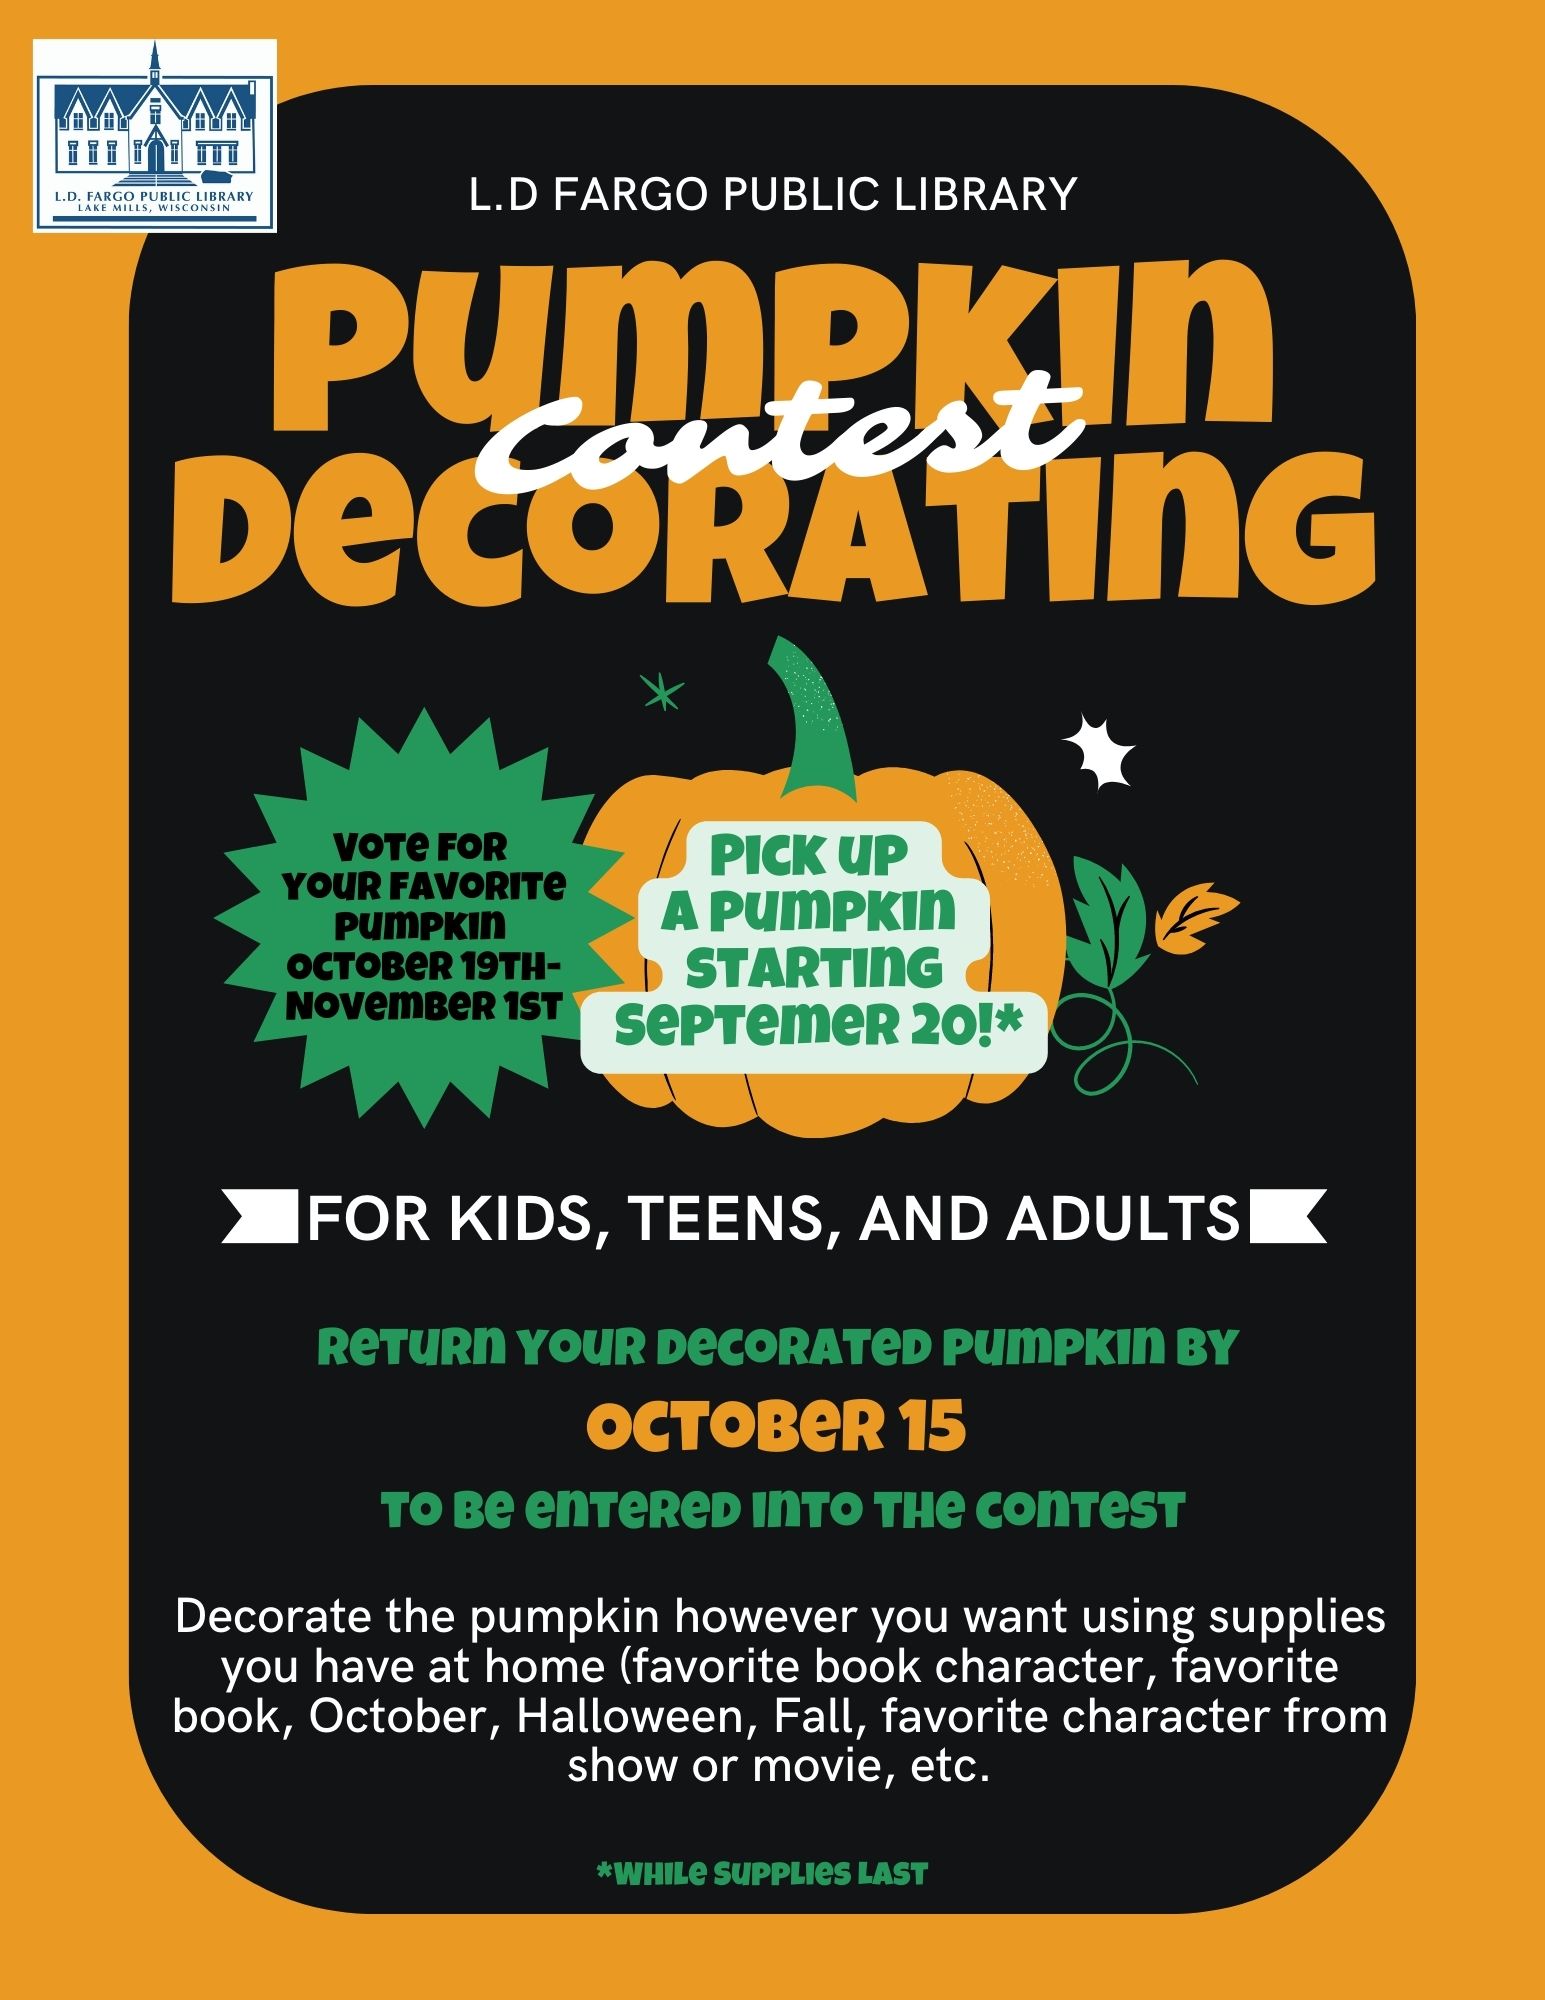 Pick up a (fake) pumpkin at the library starting September 20.  Return your decorated pumpkin to the library by October 15 to be entered into the contest.  Vote for your favorite pumpkins October 19-November 1.  For Kids, Teens, and Adults.